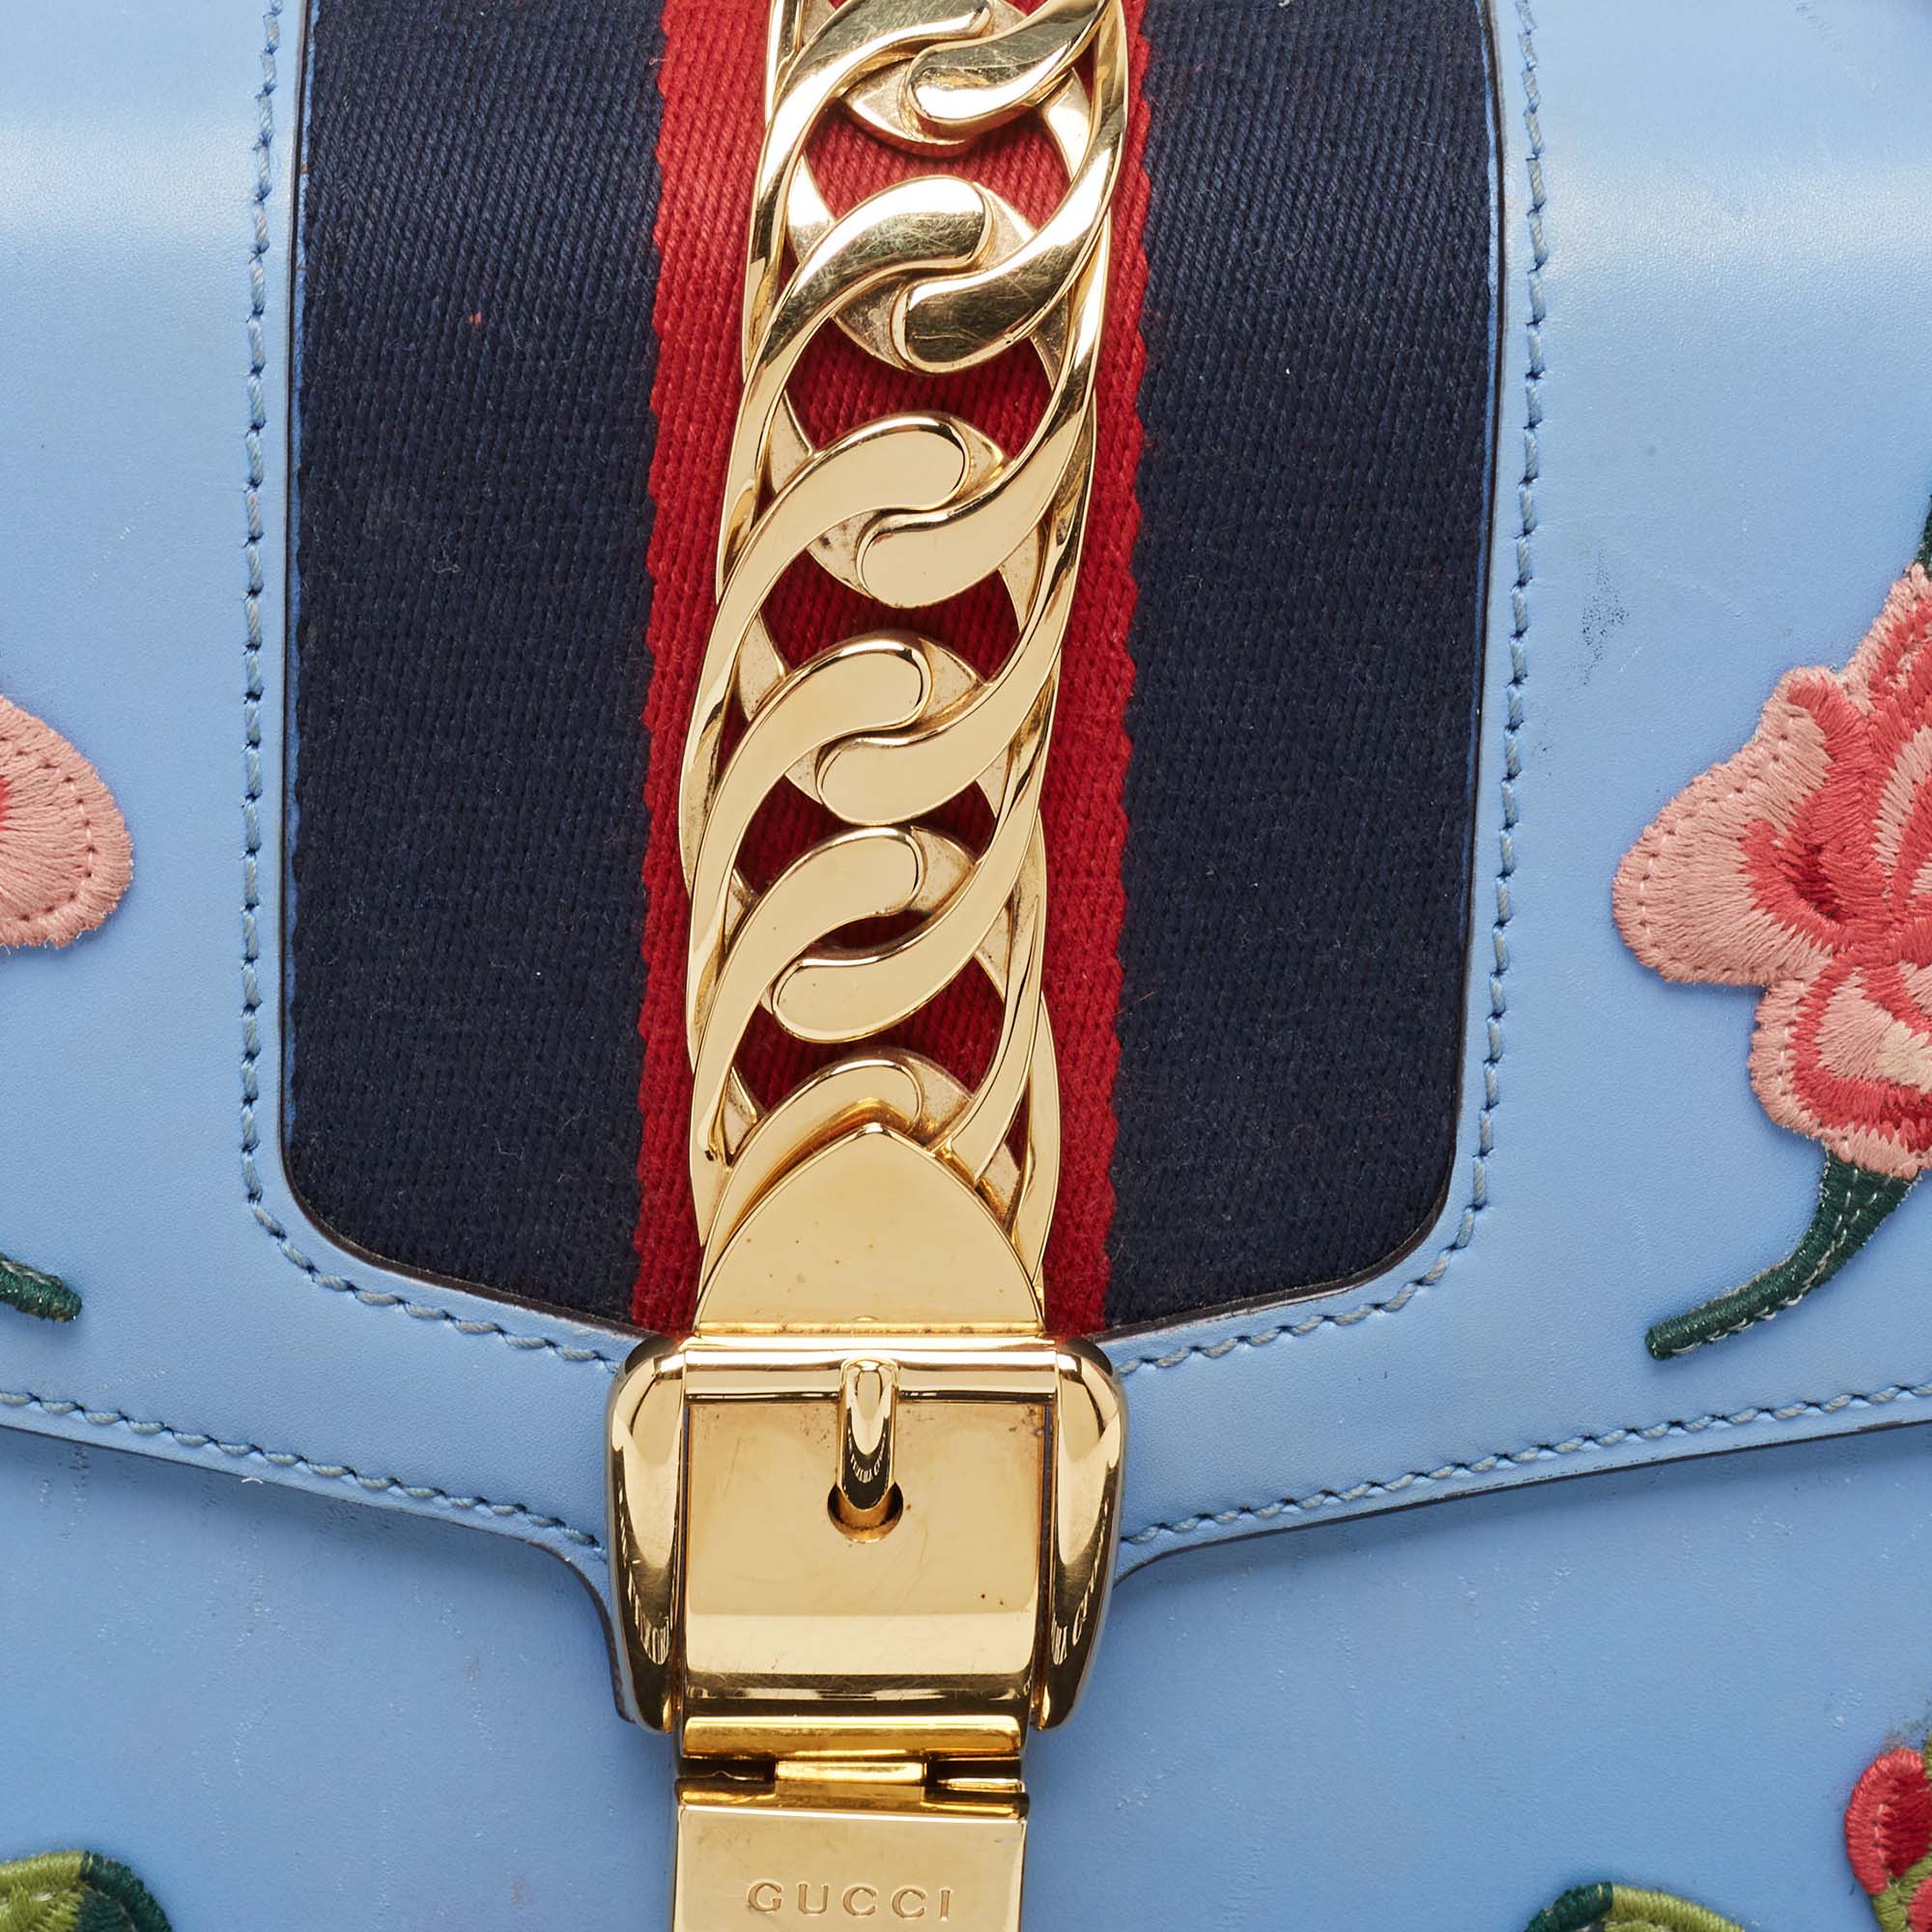 Gucci Blue Floral Embroidered Leather Medium Sylvie Top Handle Bag